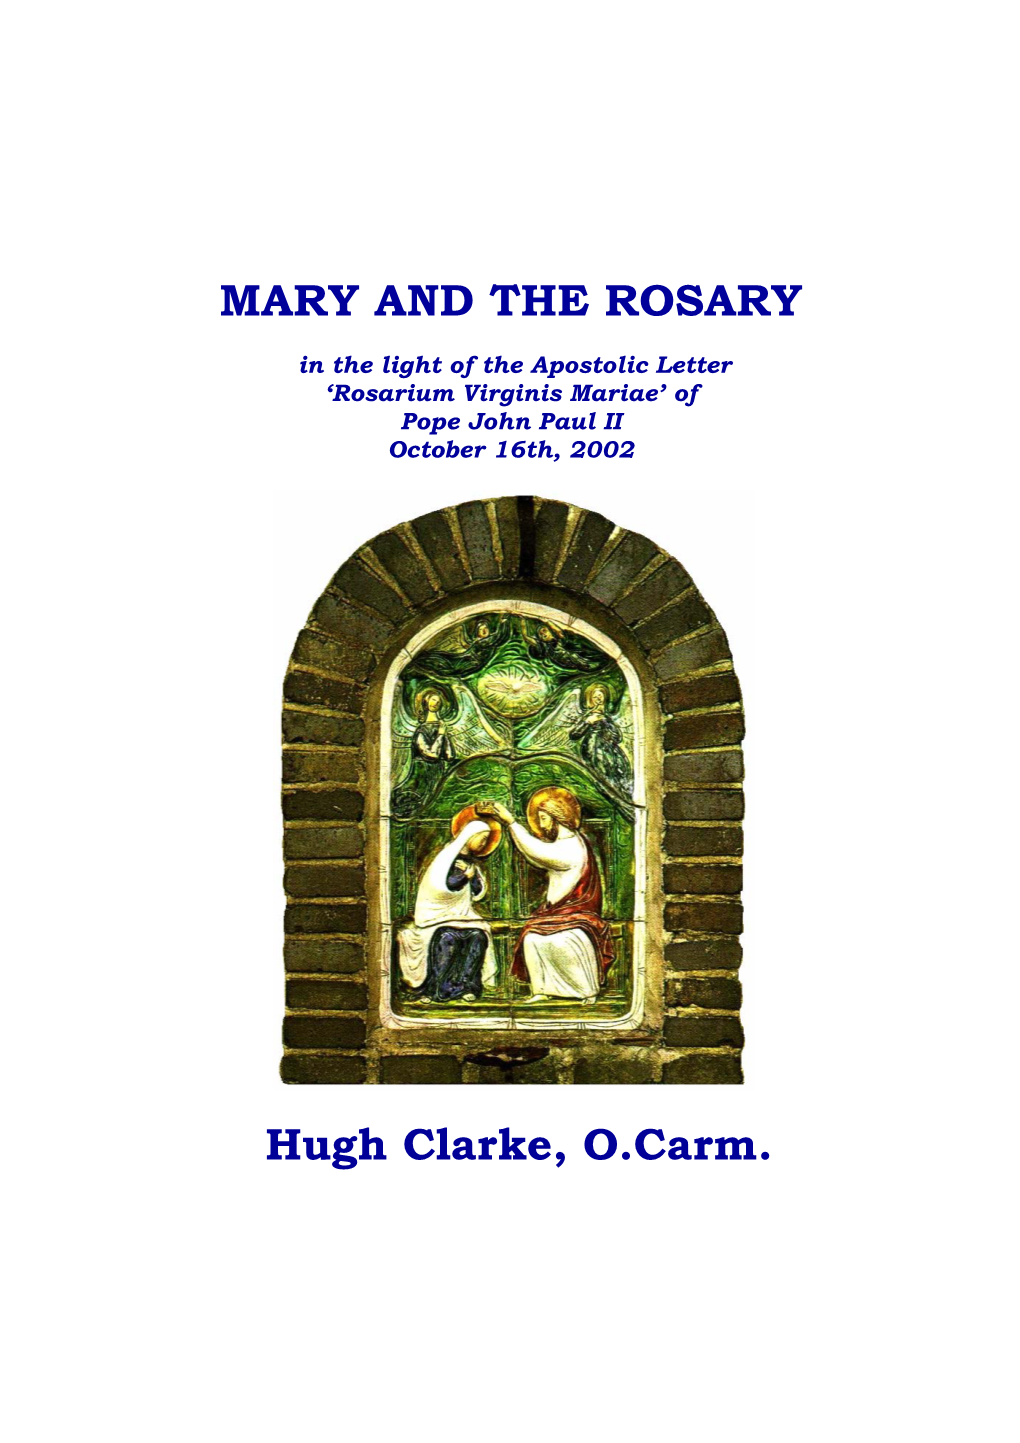 Mary and the Rosary Extract